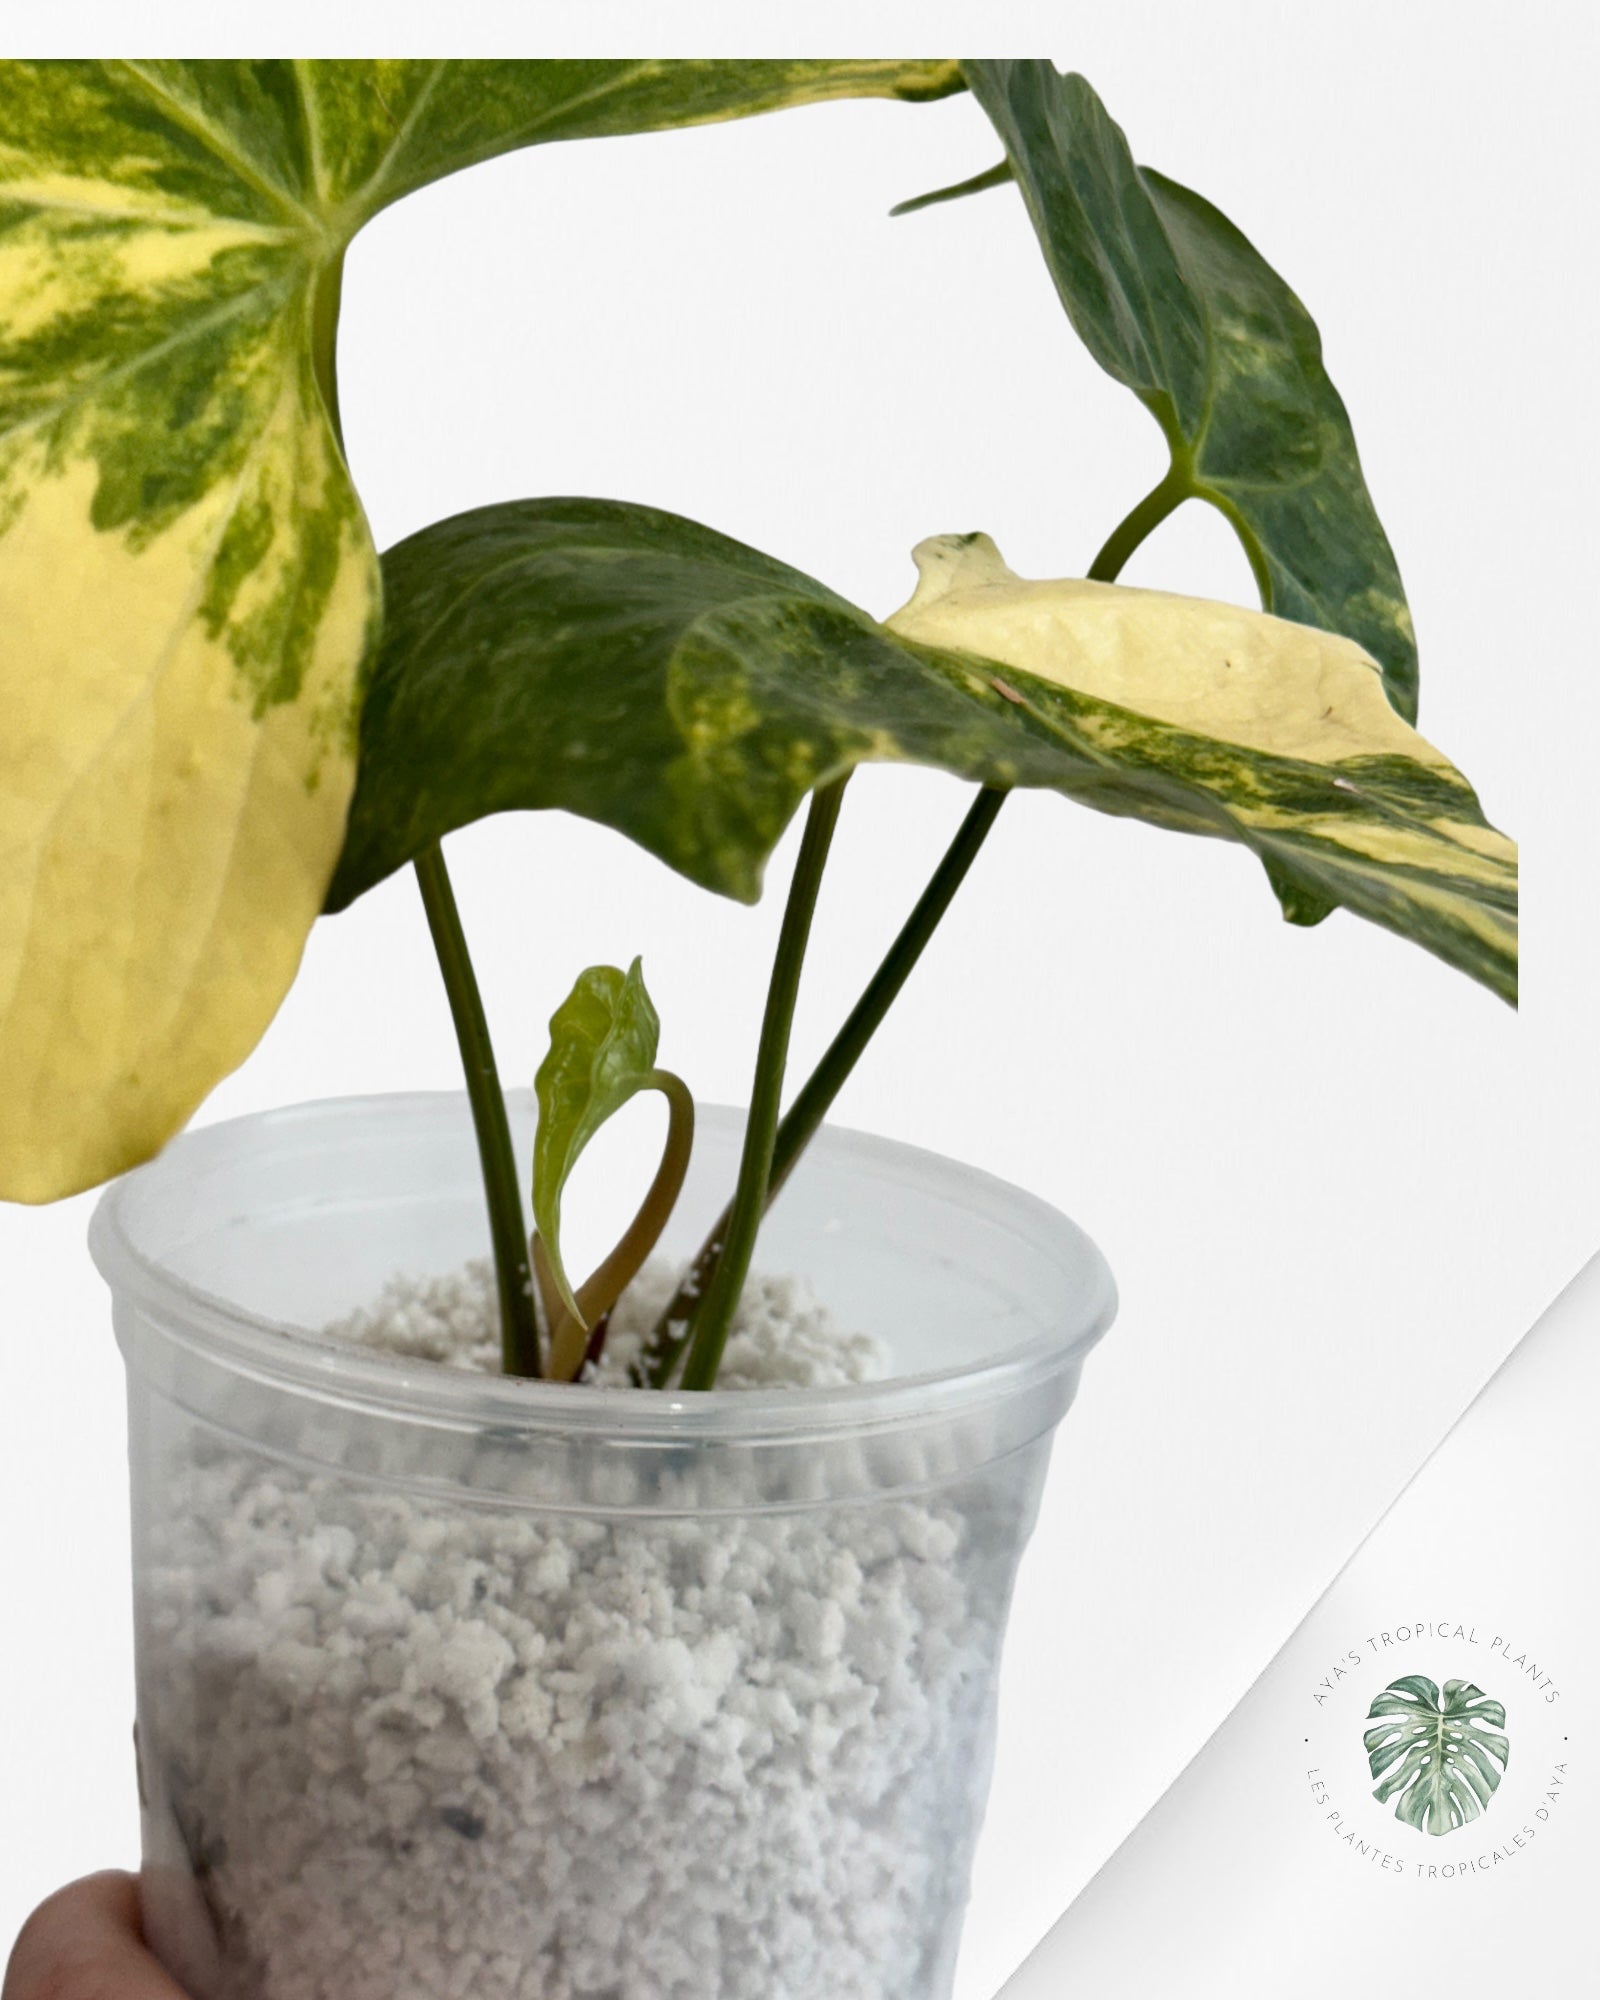 Anthurium Pterodactyl Variagated